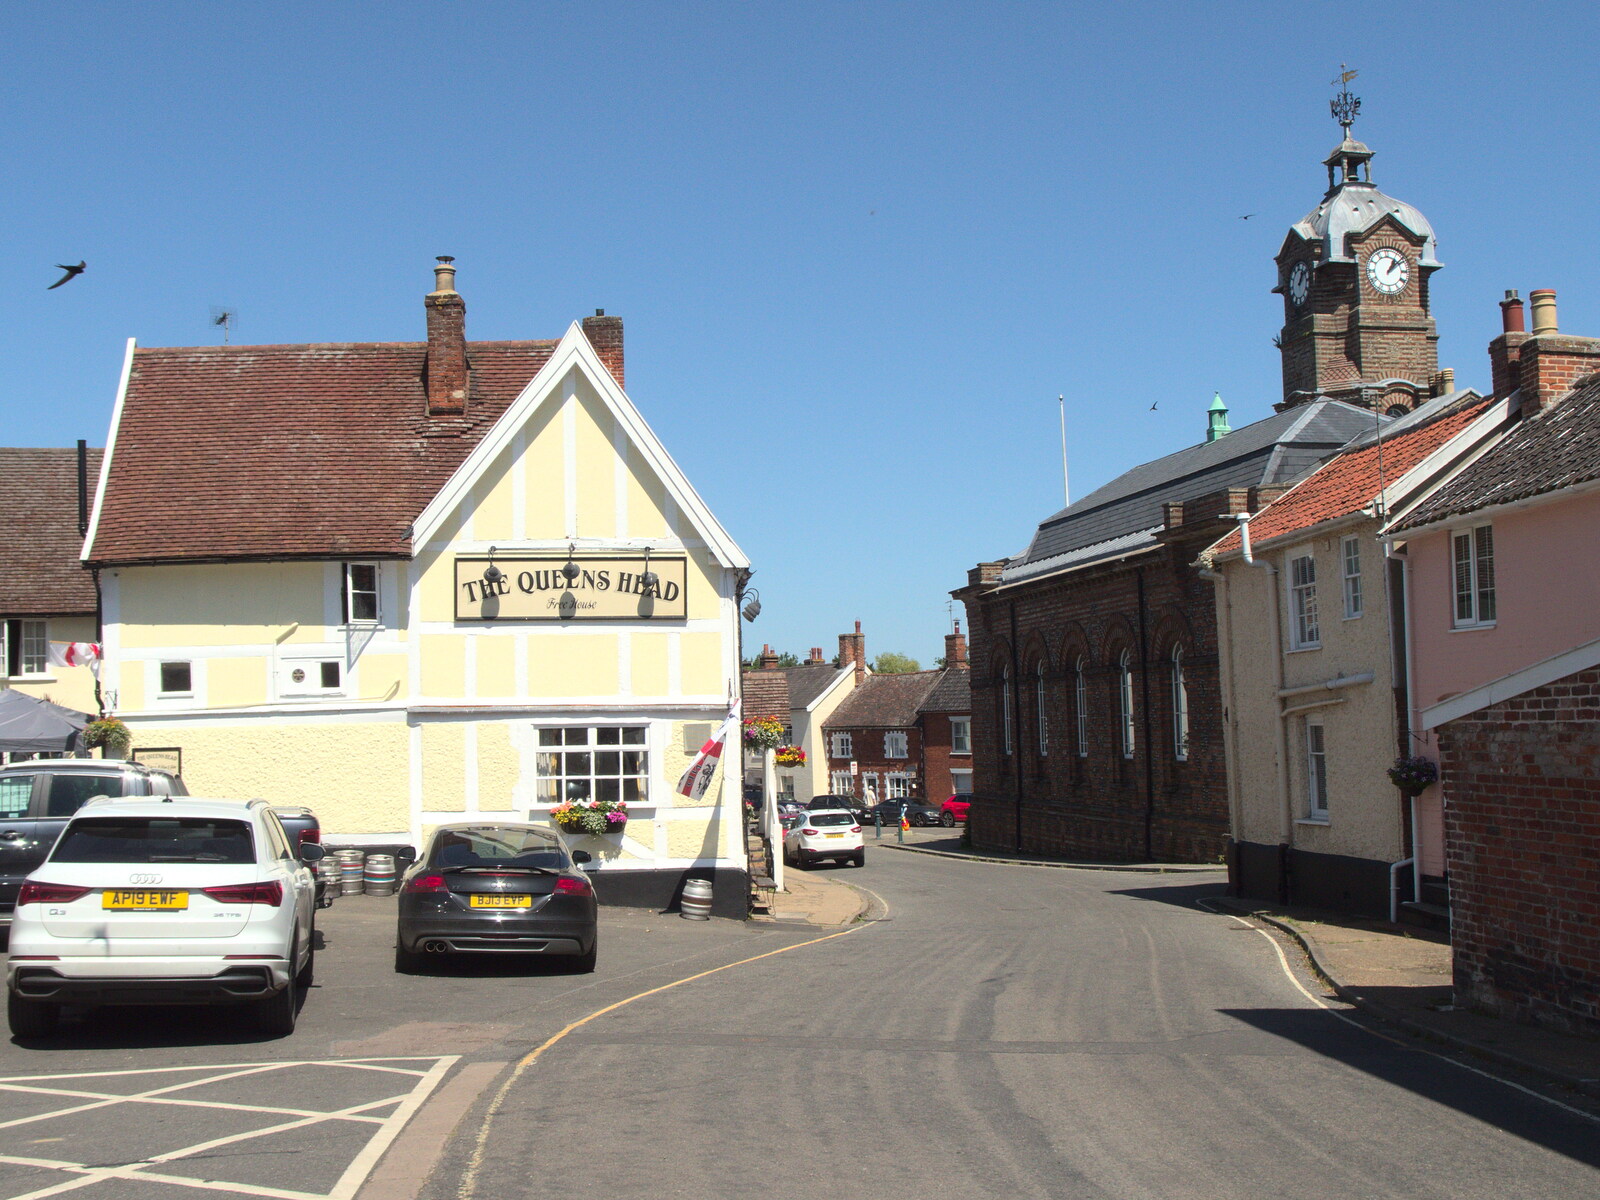 The Queen's Head and town hall on Cross Street from Hares, Tortoises and Station 119, Eye, Suffolk - 19th July 2021